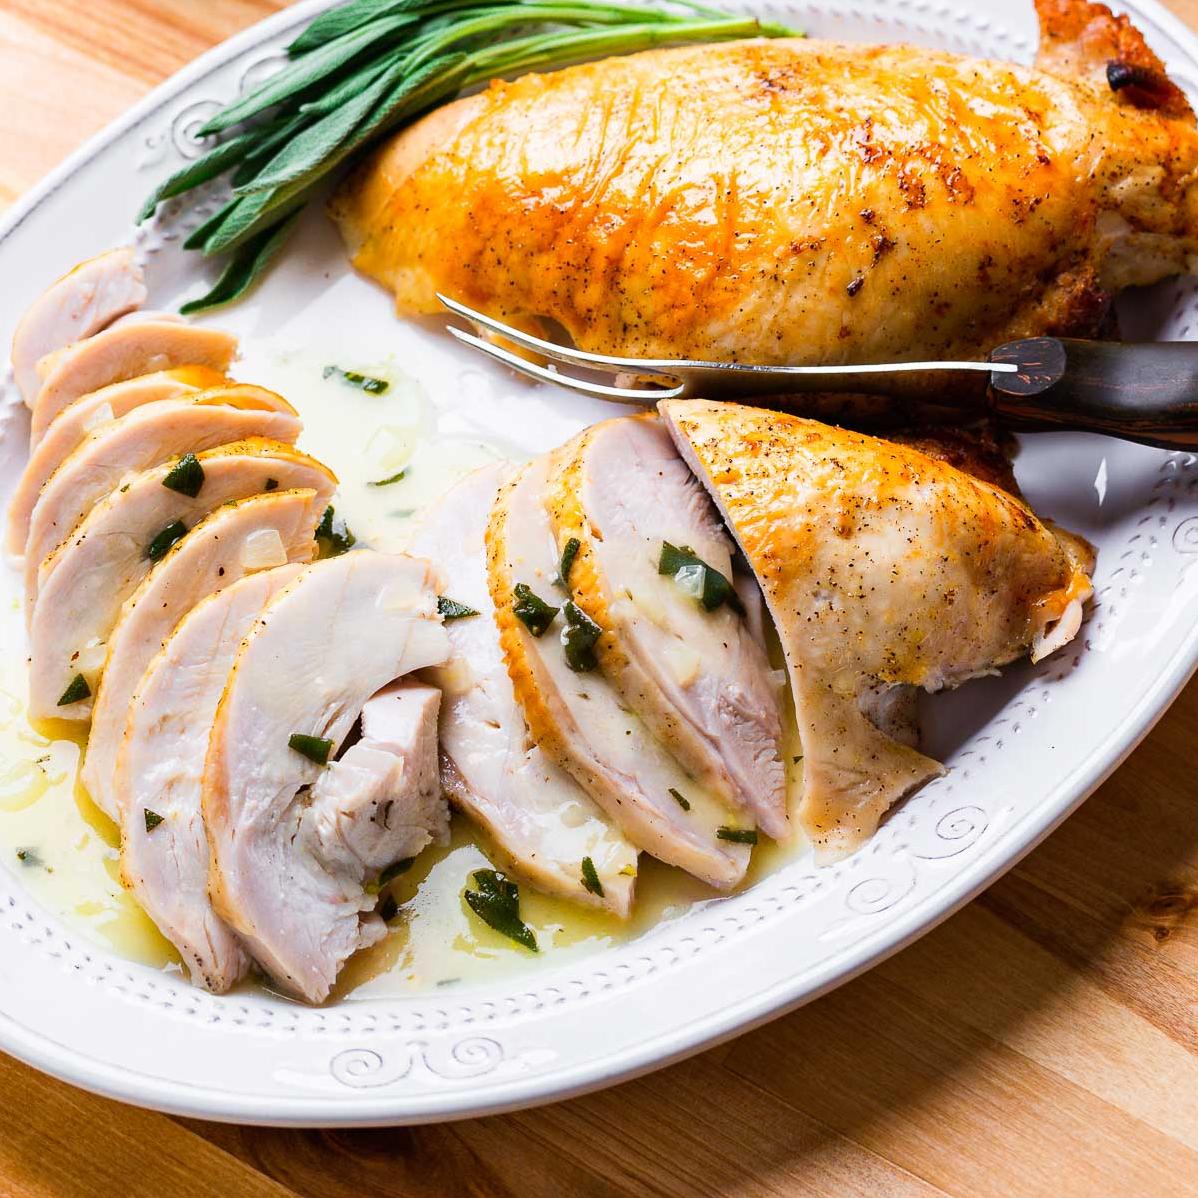  Perfectly roasted turkey bathed in white wine pan sauce.